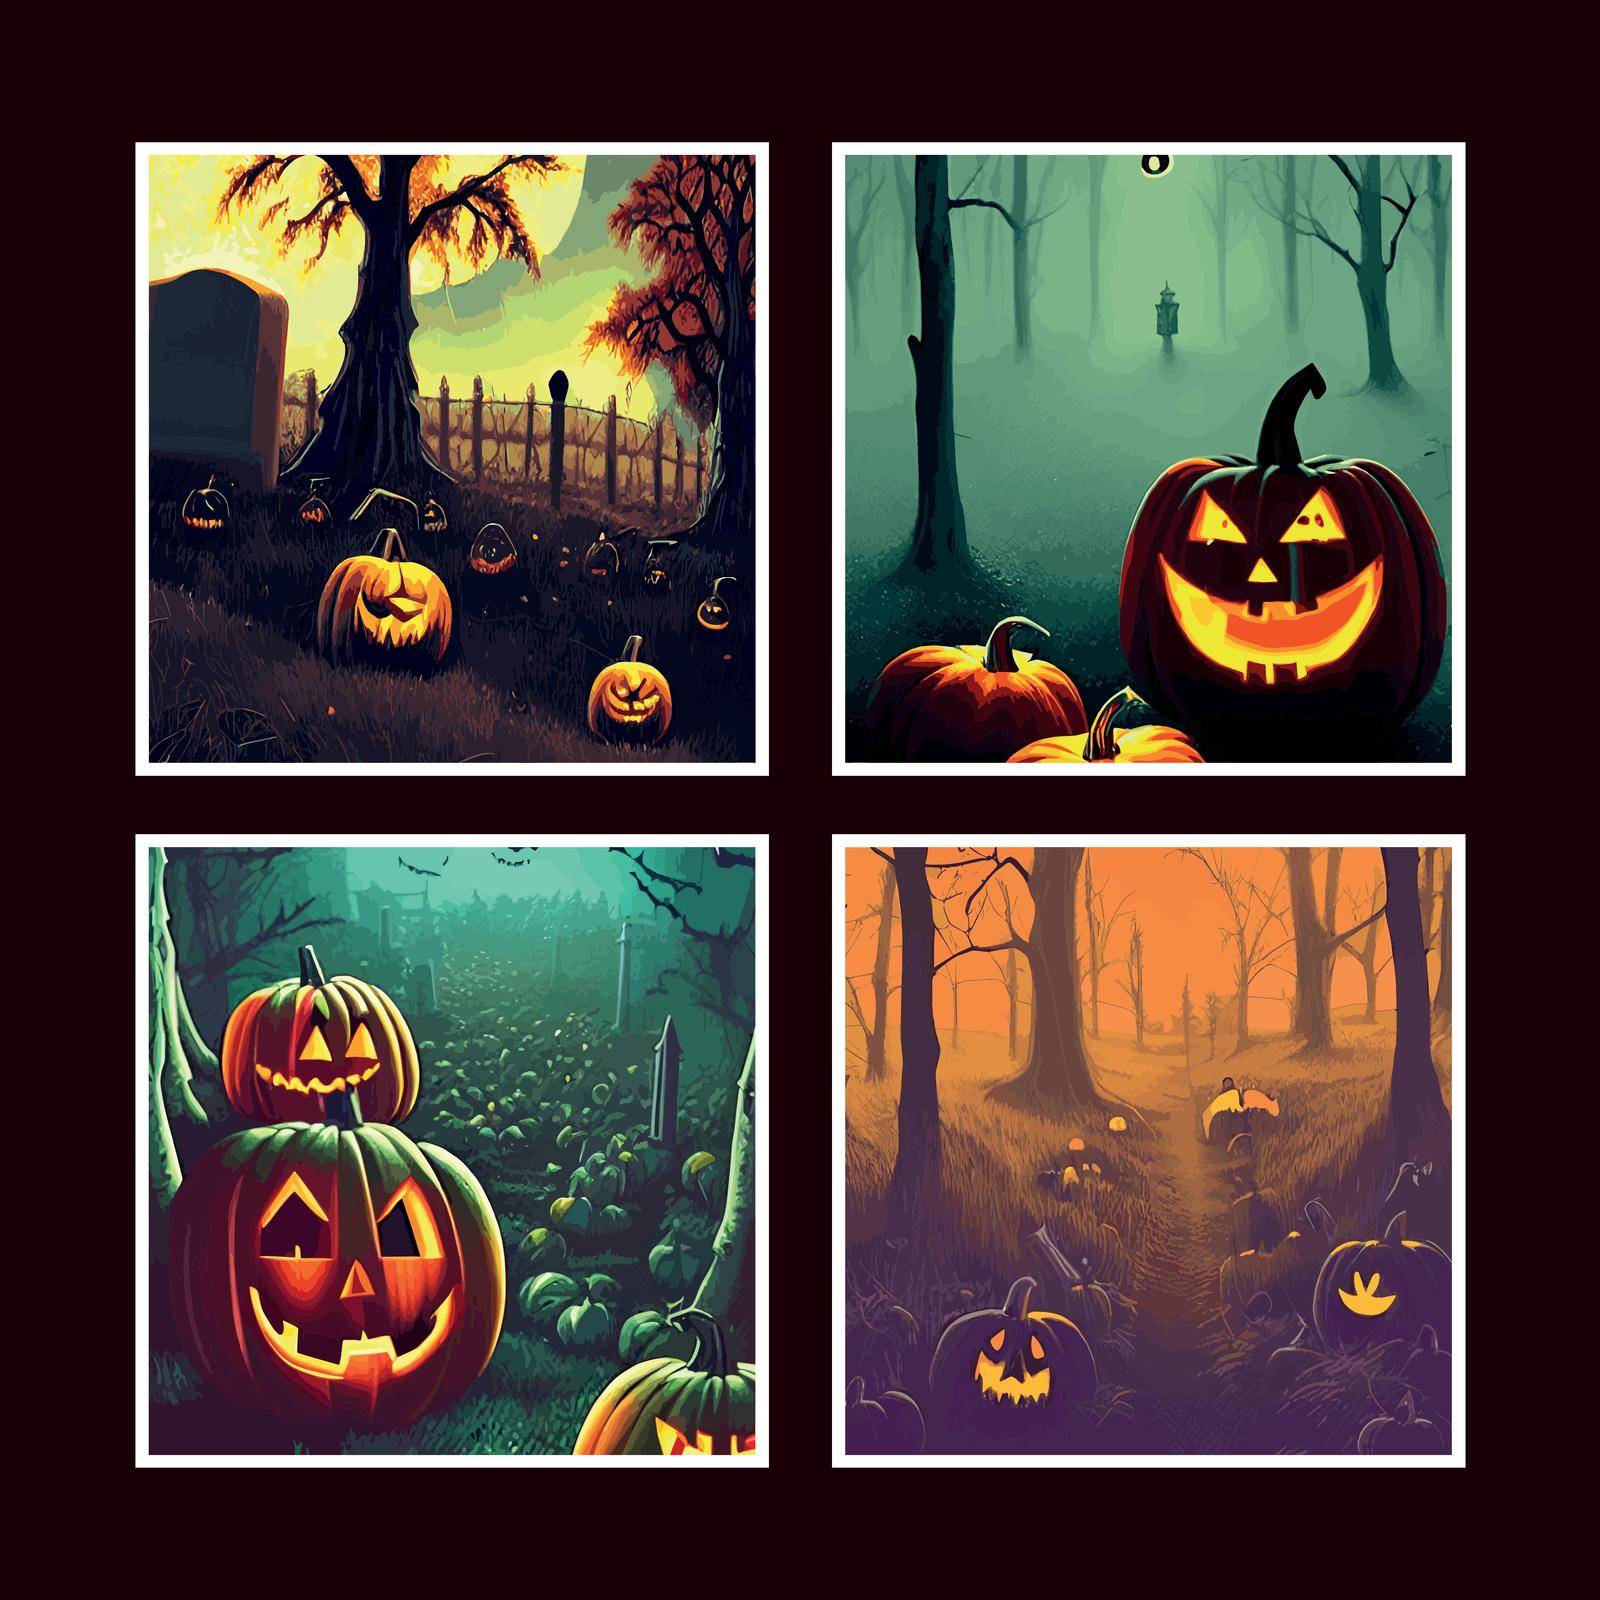 dark gothic vector illustration with drawn cartoon, , pumpkin and dark background. set of four posters for a halloween party. Halloween night background with pumpkin, ghost house and full moon.